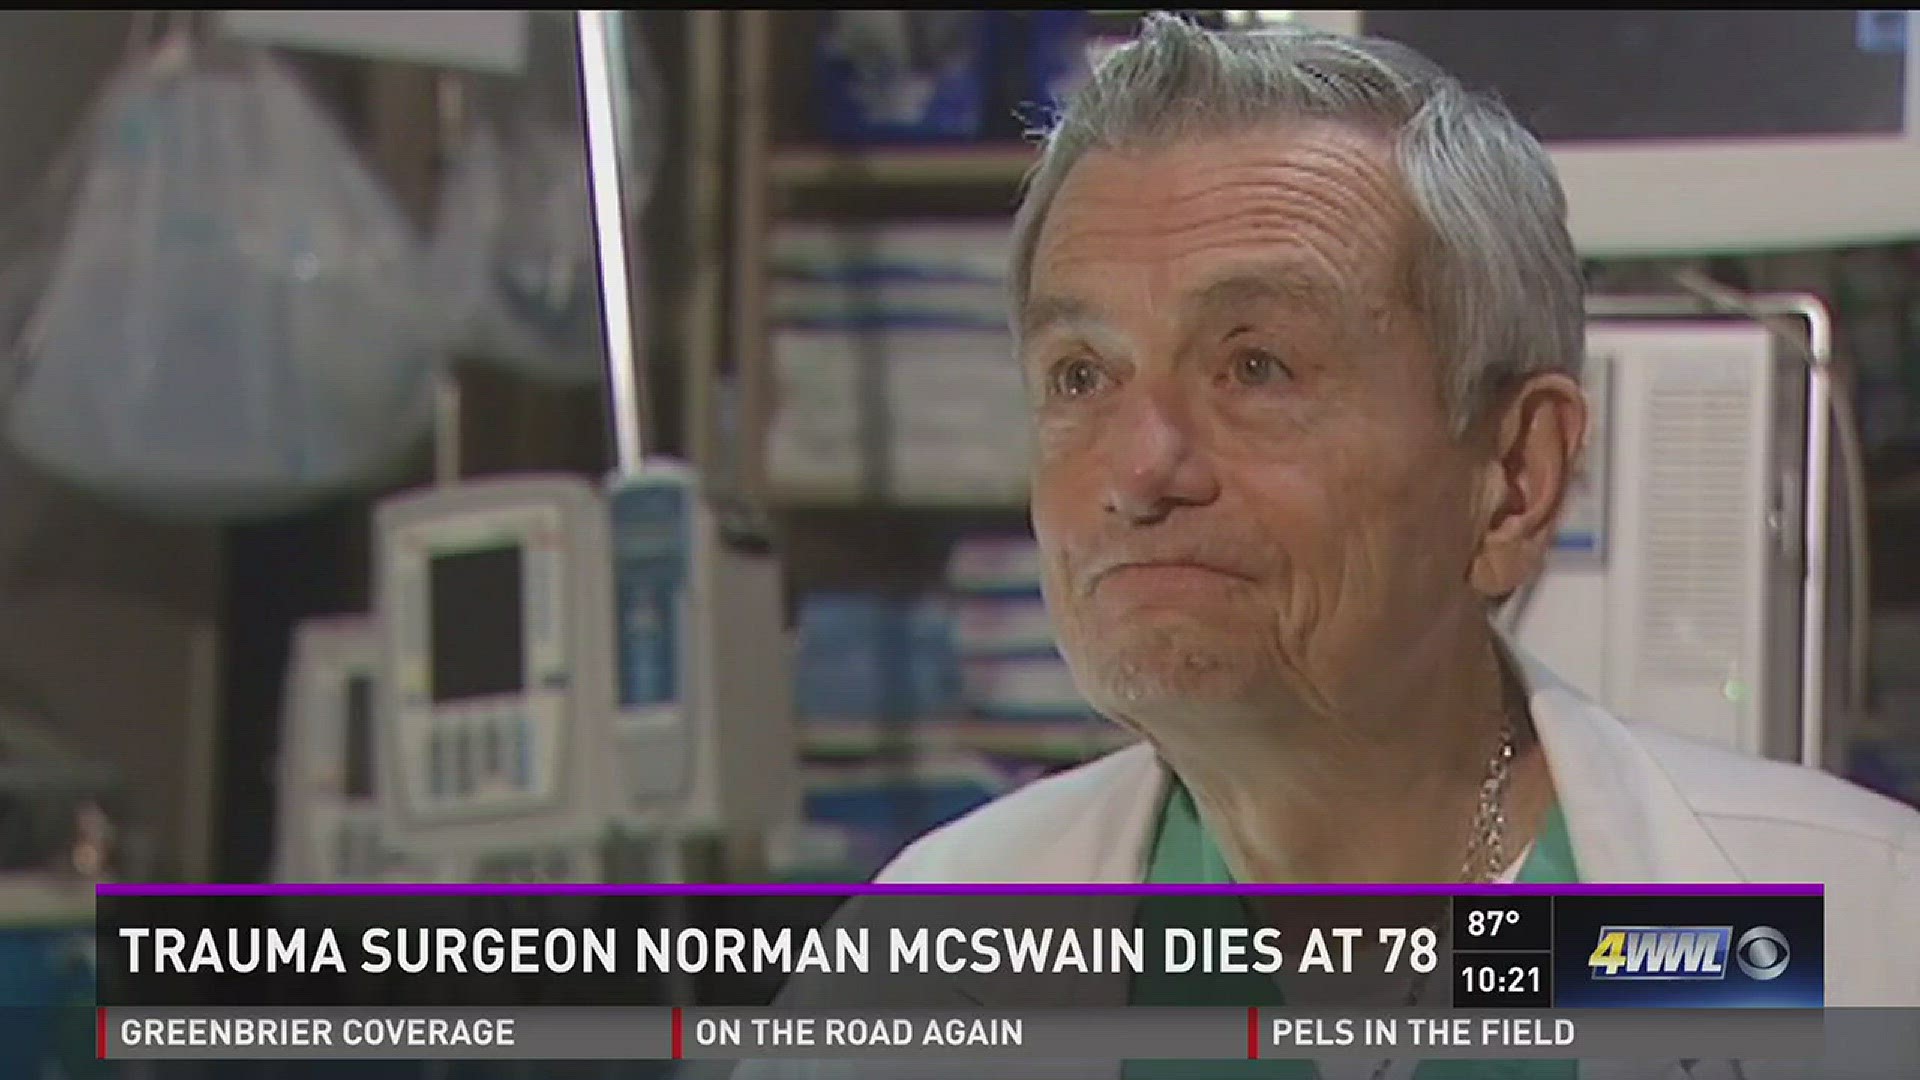 Dr. Norman McSwain, internationally renowned for his work as the head of trauma at Charity Hospital and an expert in emergency medicine, died Tuesday, his family said. He was 78.